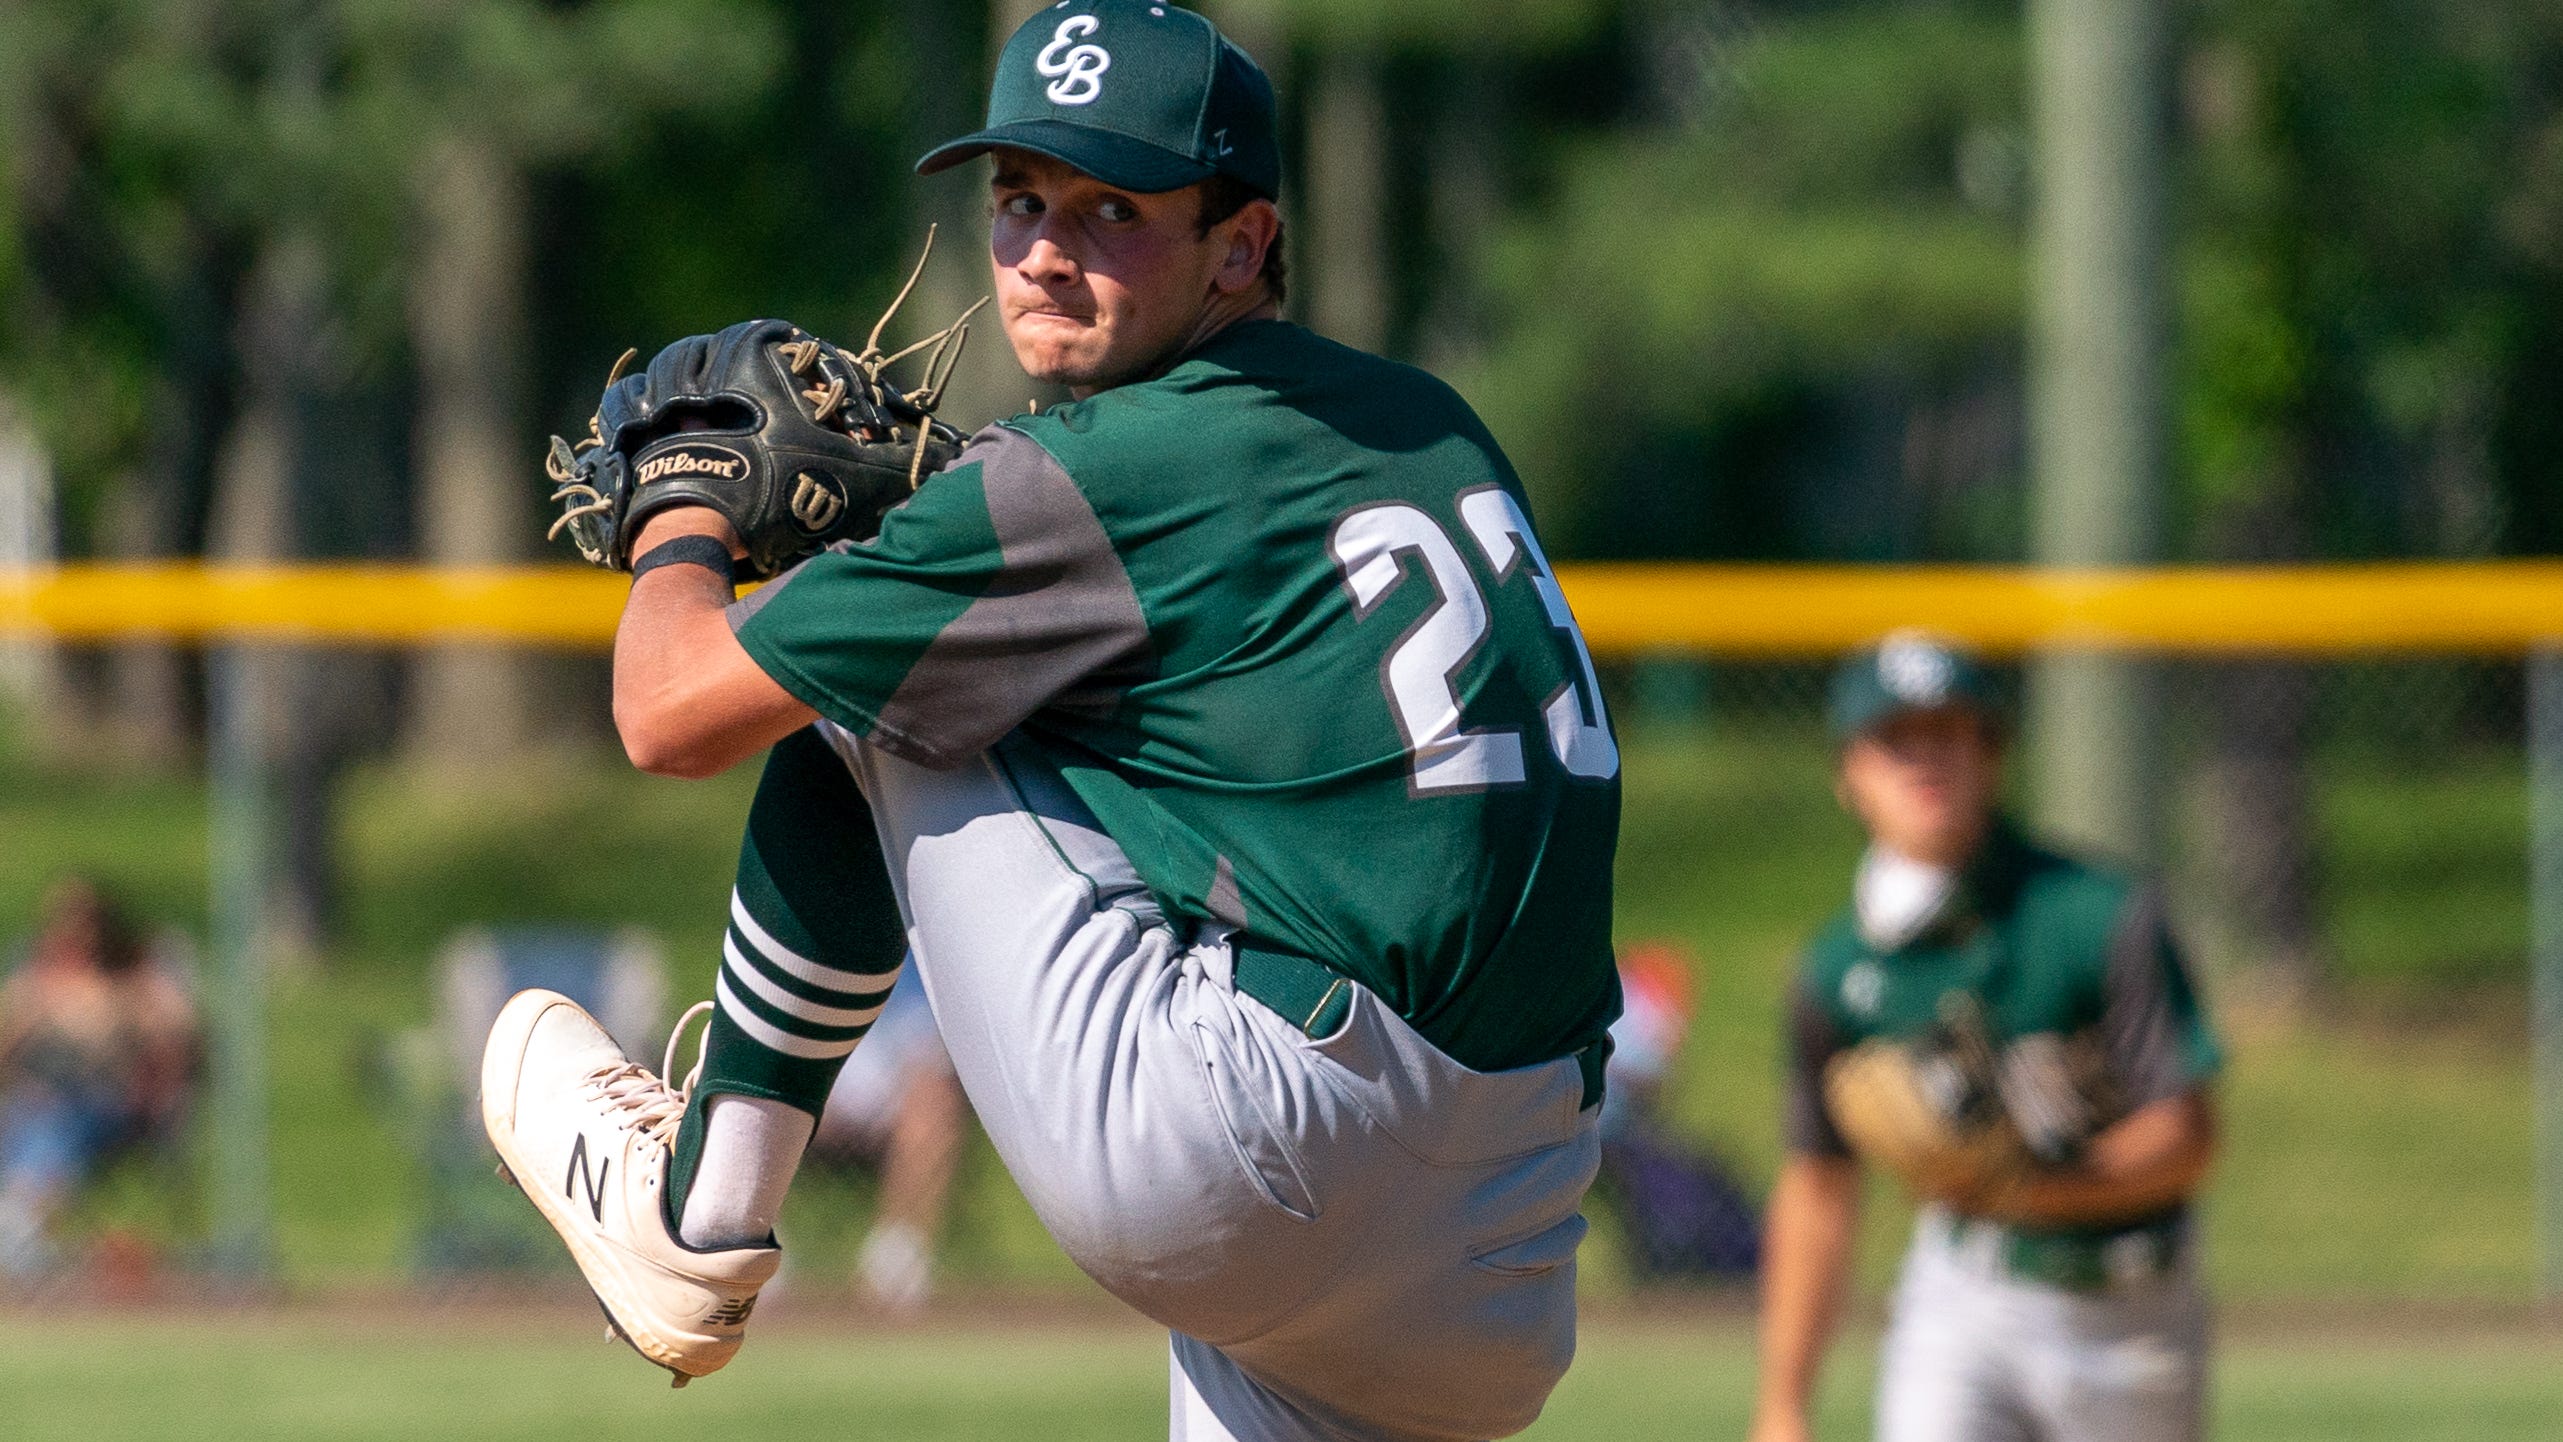 GMC baseball tournament primer Storylines to follow for every team